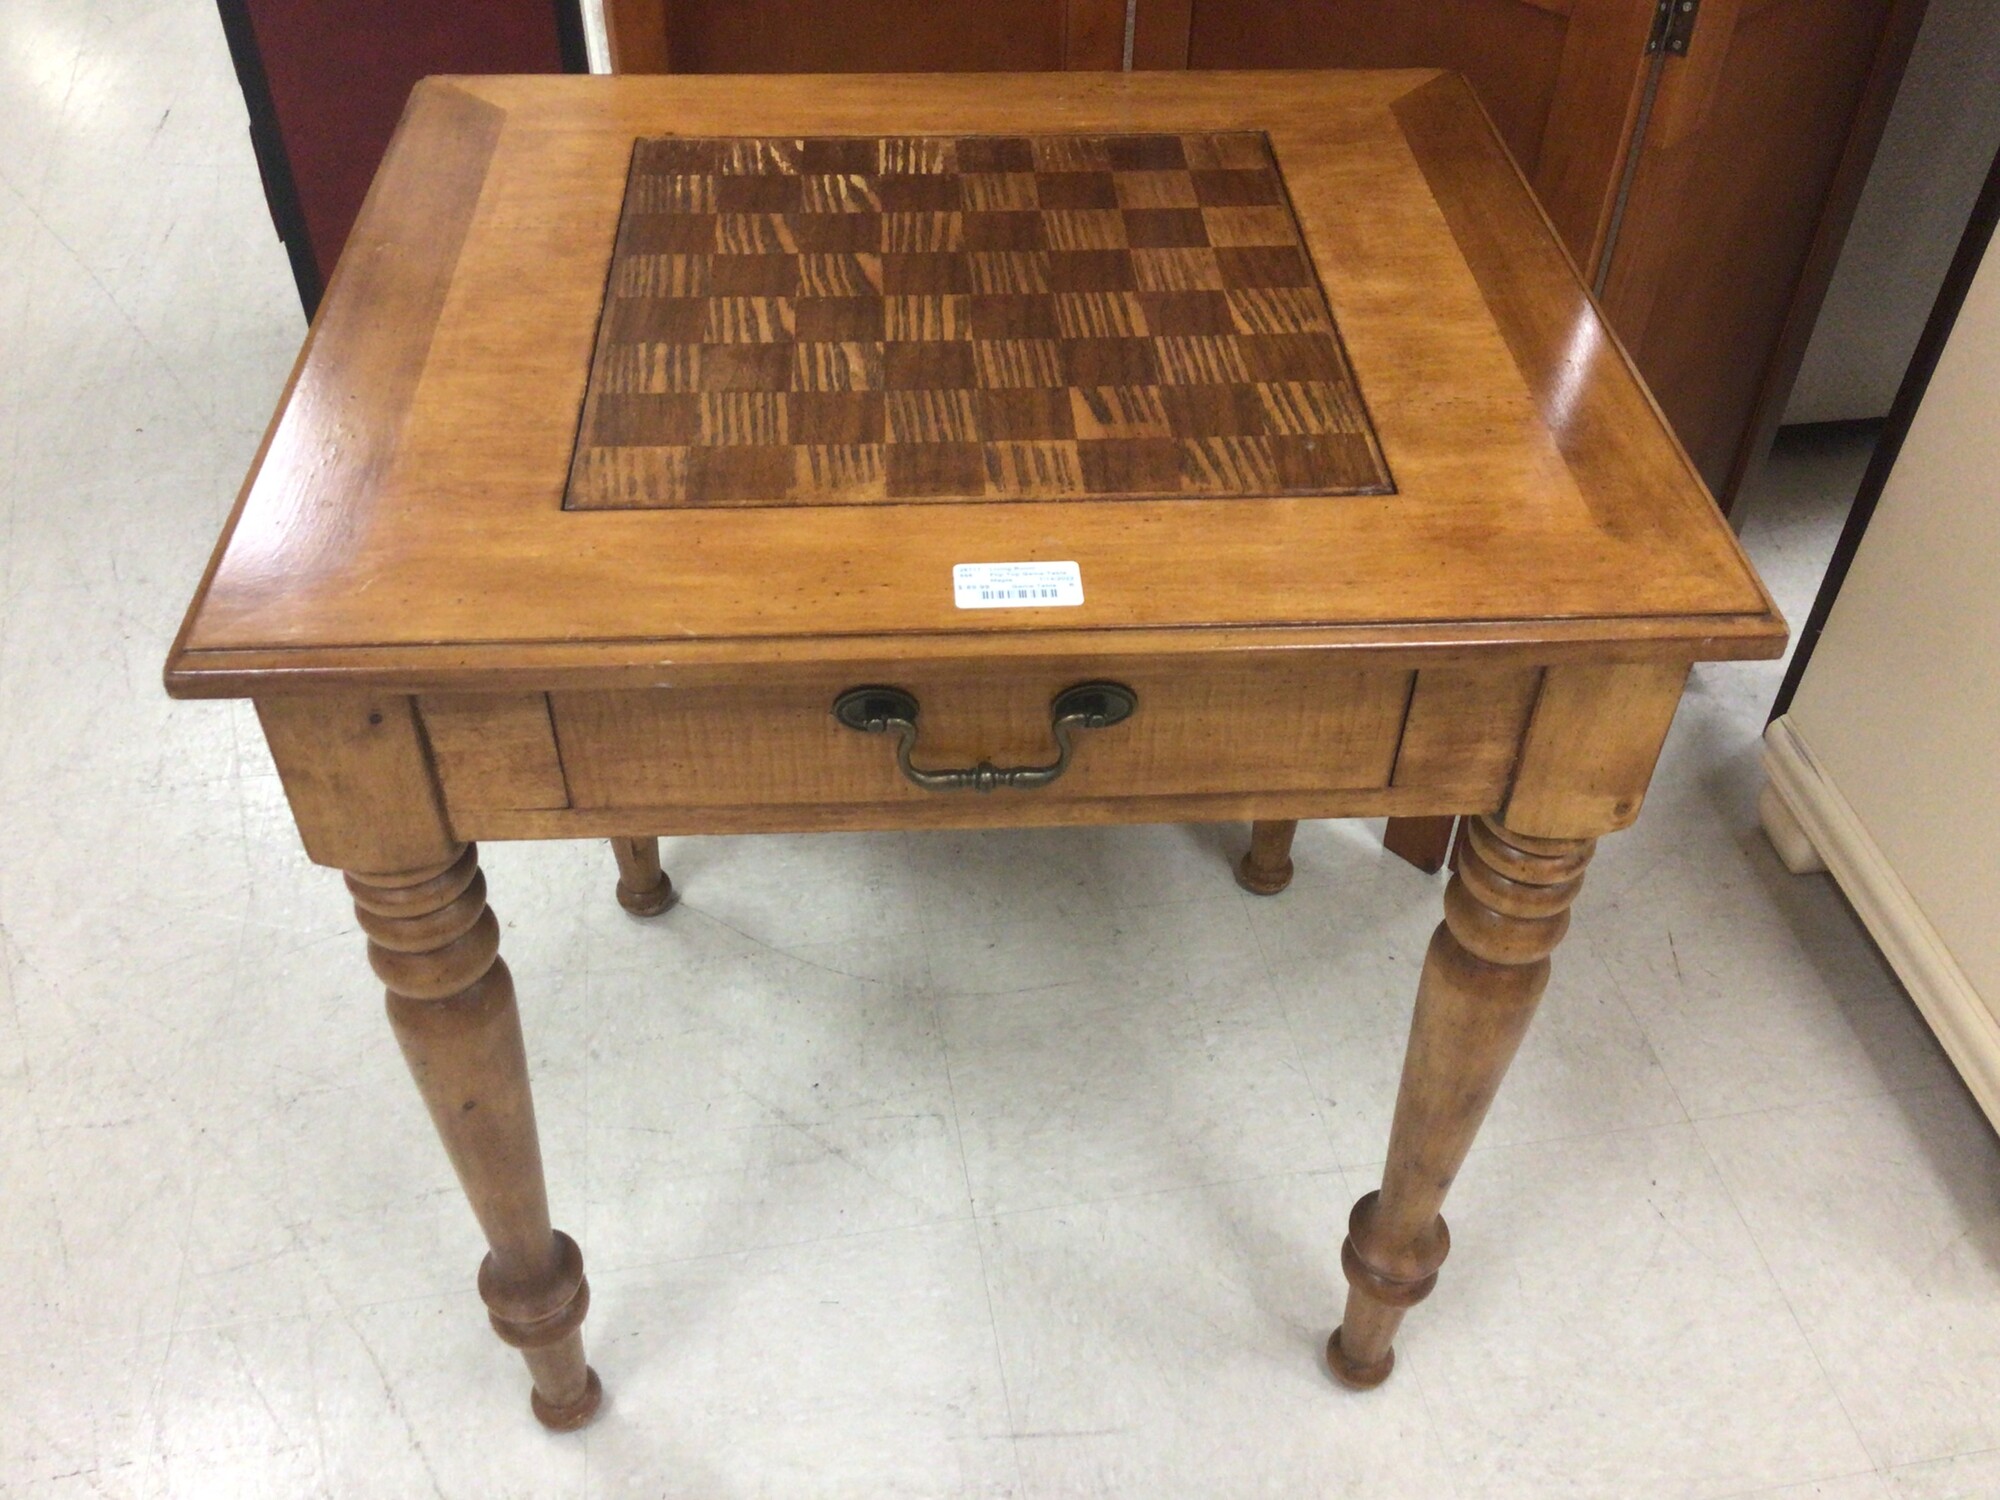 Flip Top Game Table, Maple, Game Table
Checkers/Chess/Backgammon
28in wide x 24in deep x 30.5in tall